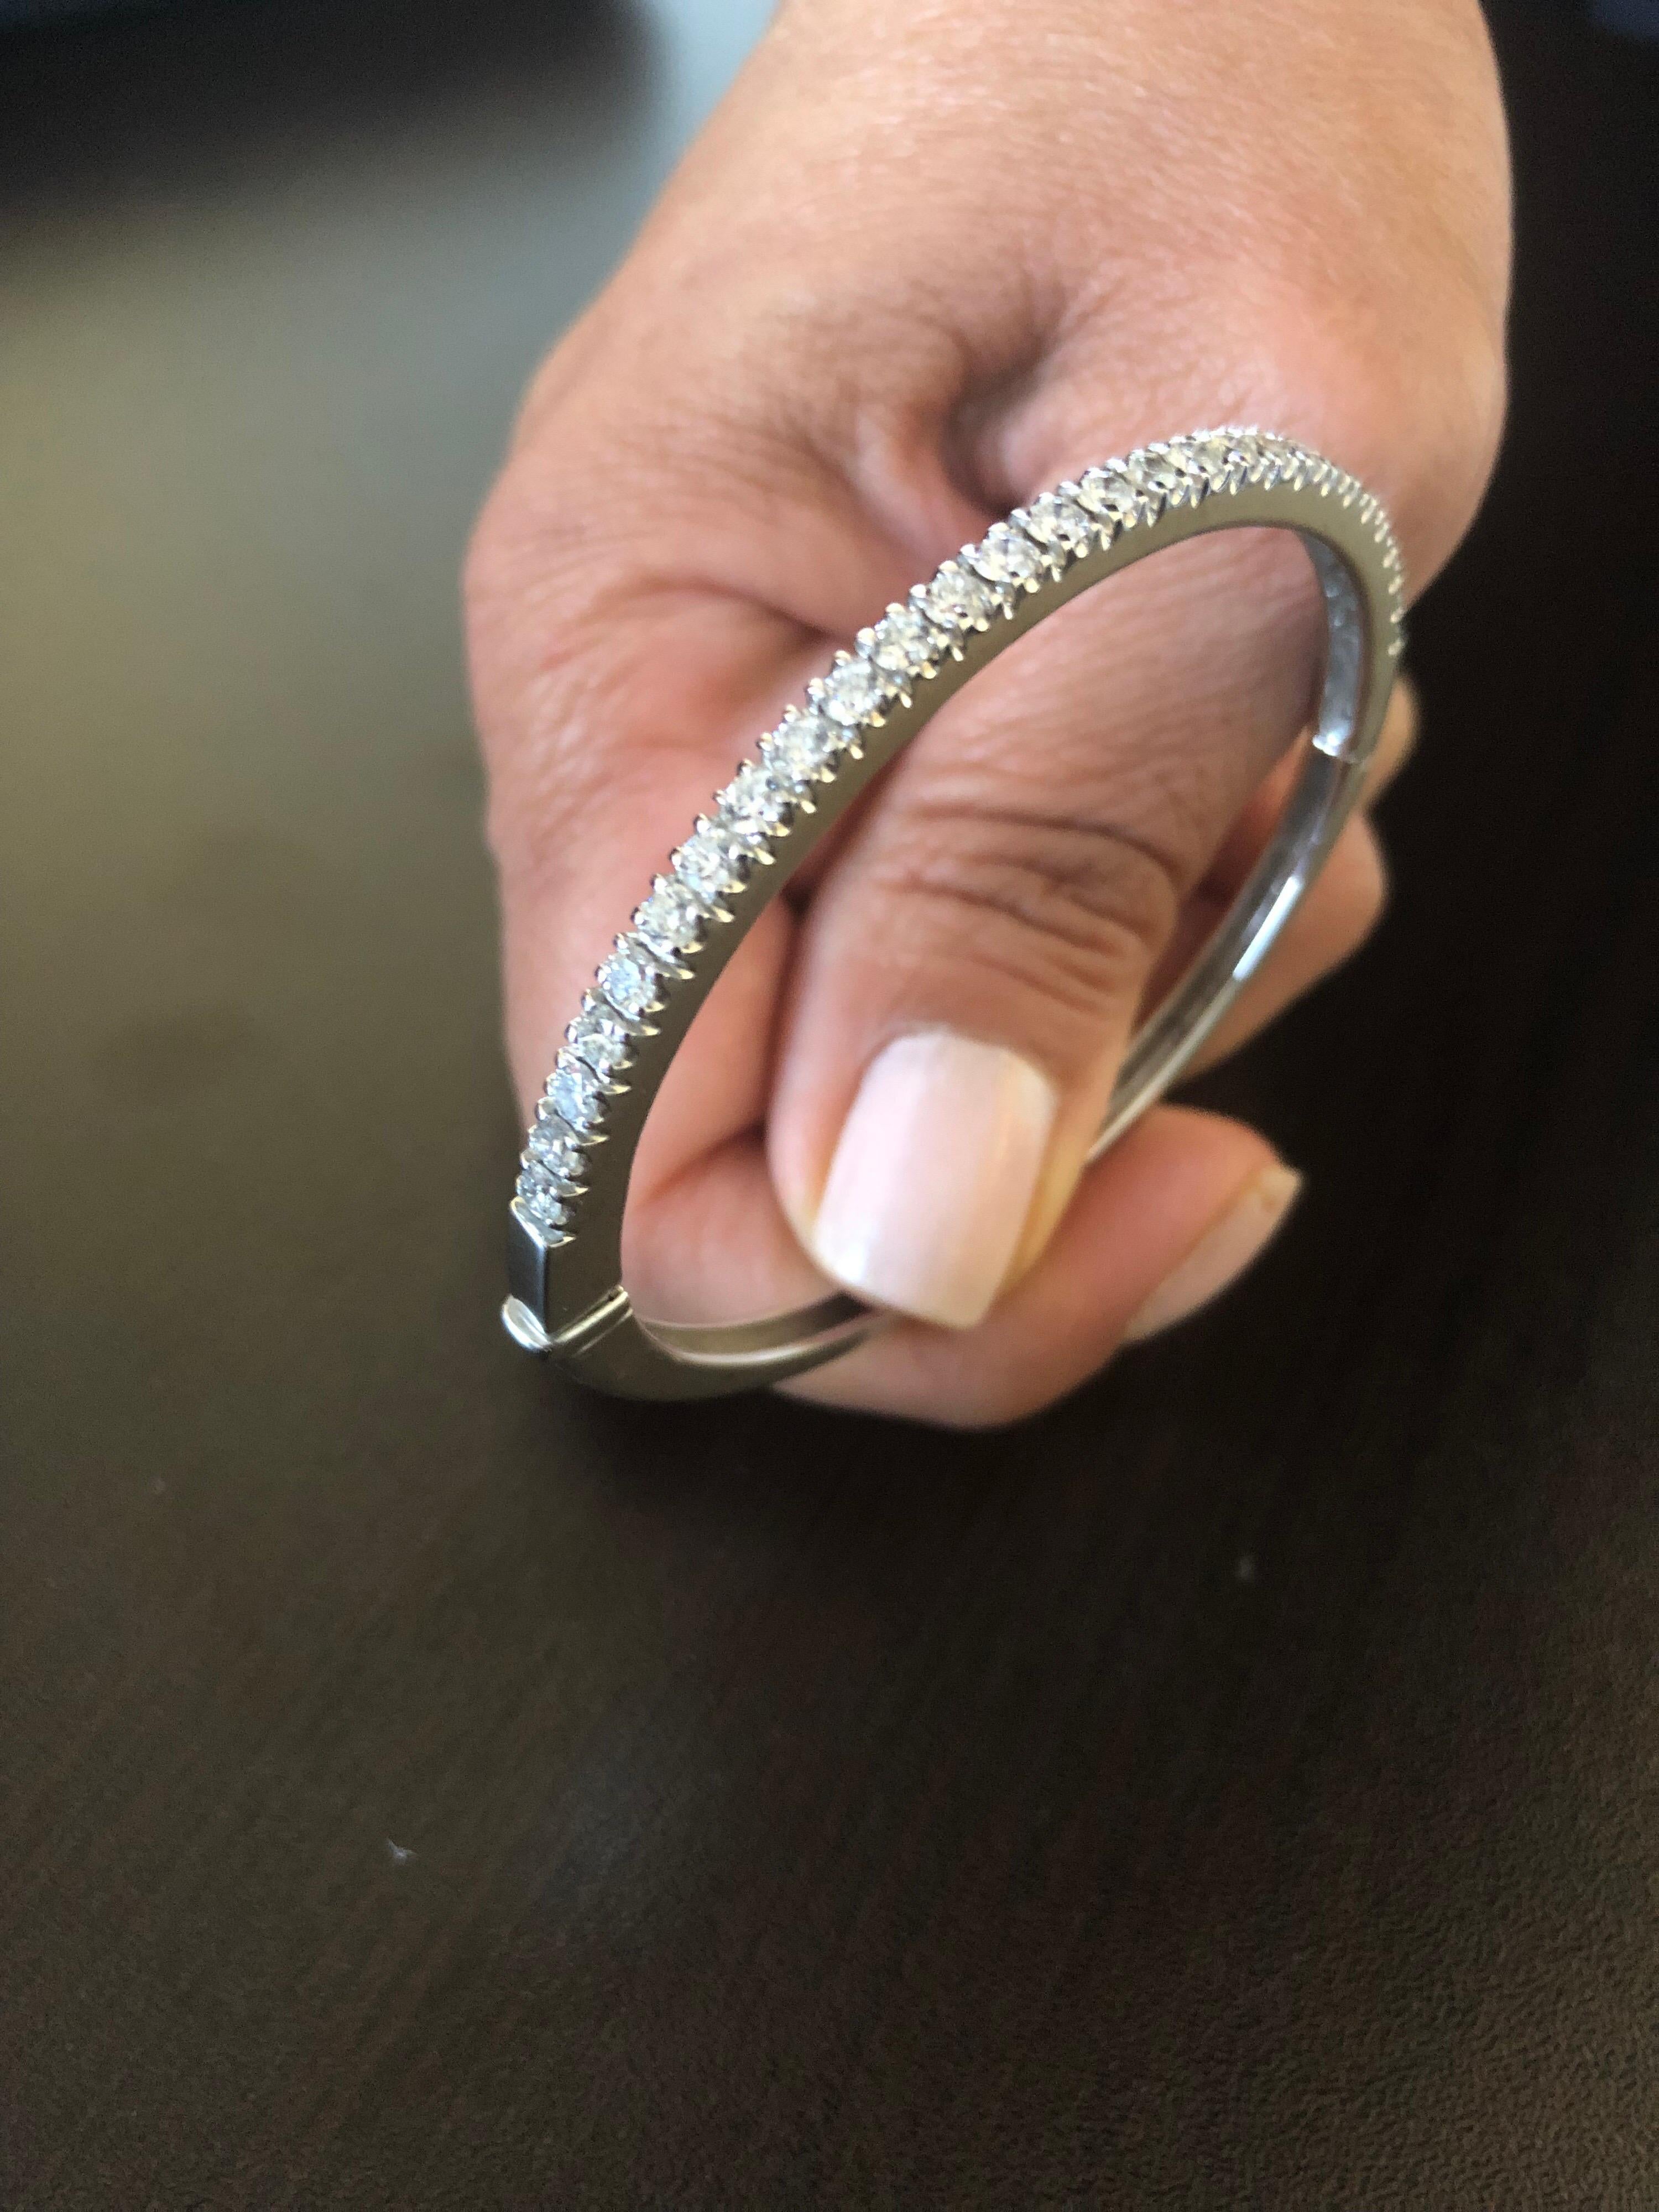 Half-Way diamond bangle set in 14K white gold. Each stone weights 0.07 carats each. The total weight of the bangle is 2.30 carats. The color of the stones is G, the clarity is SI.